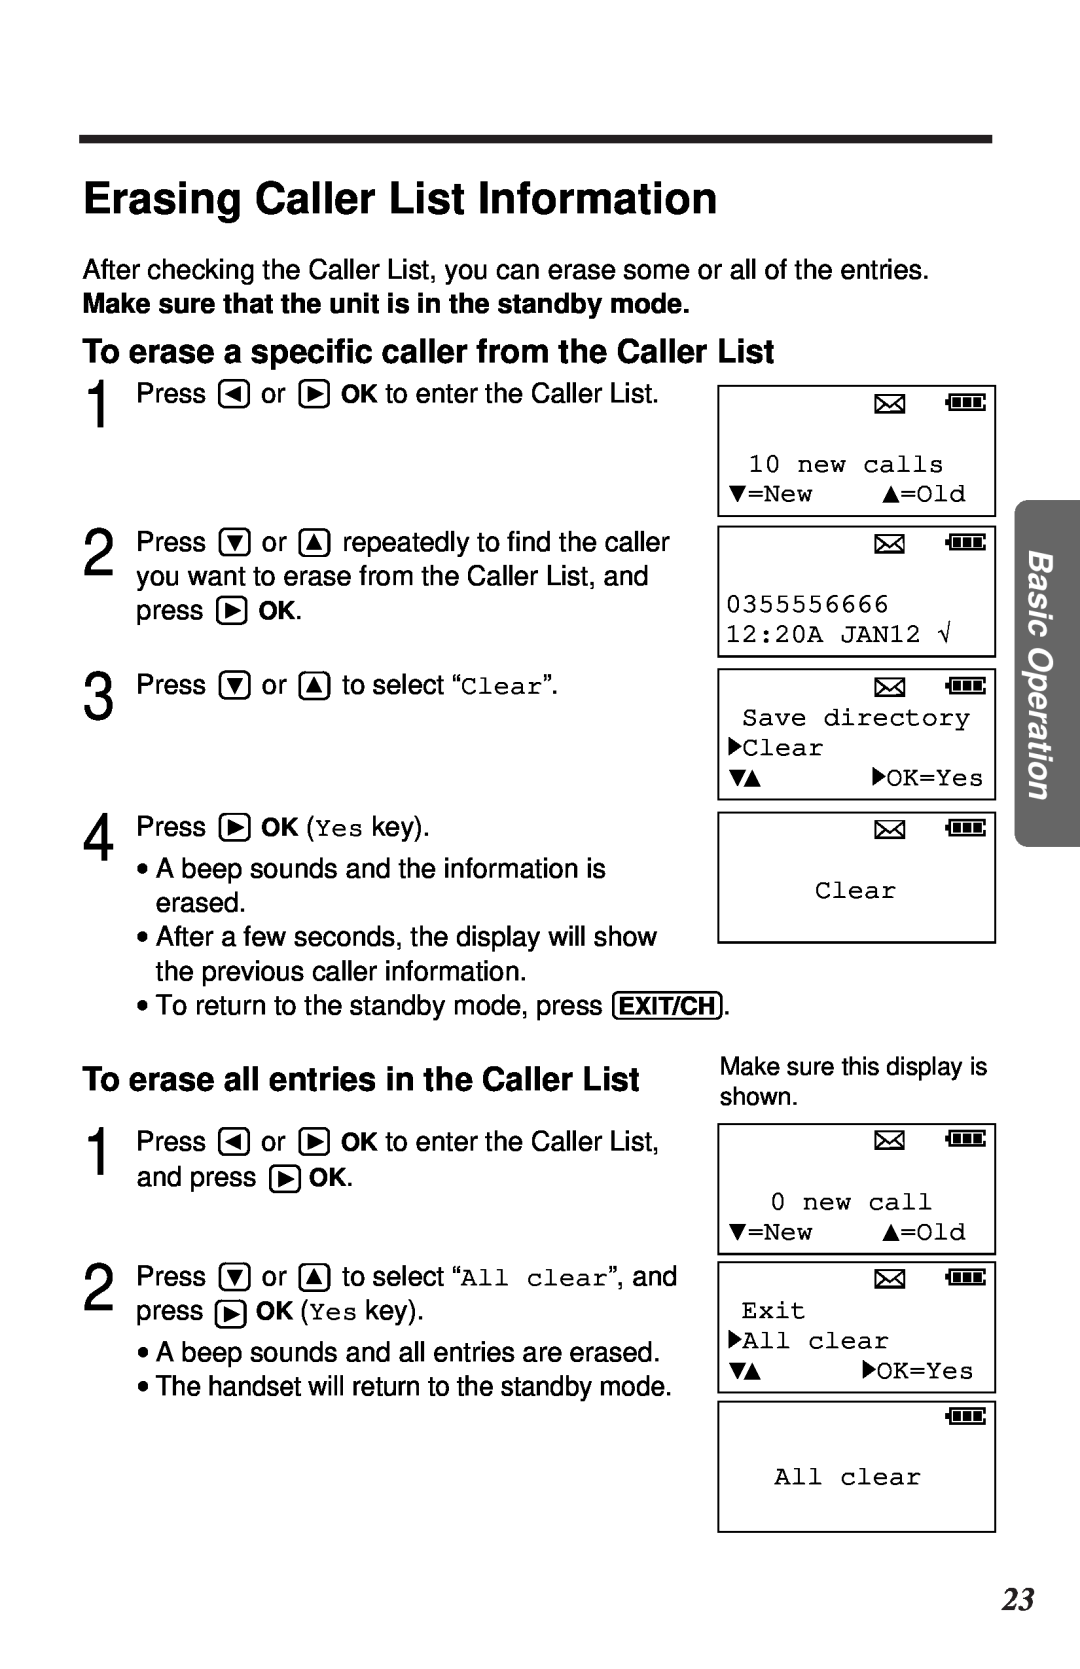 Panasonic KX-TC1105ALB Erasing Caller List Information, To erase a specific caller from the Caller List, Basic Operation 